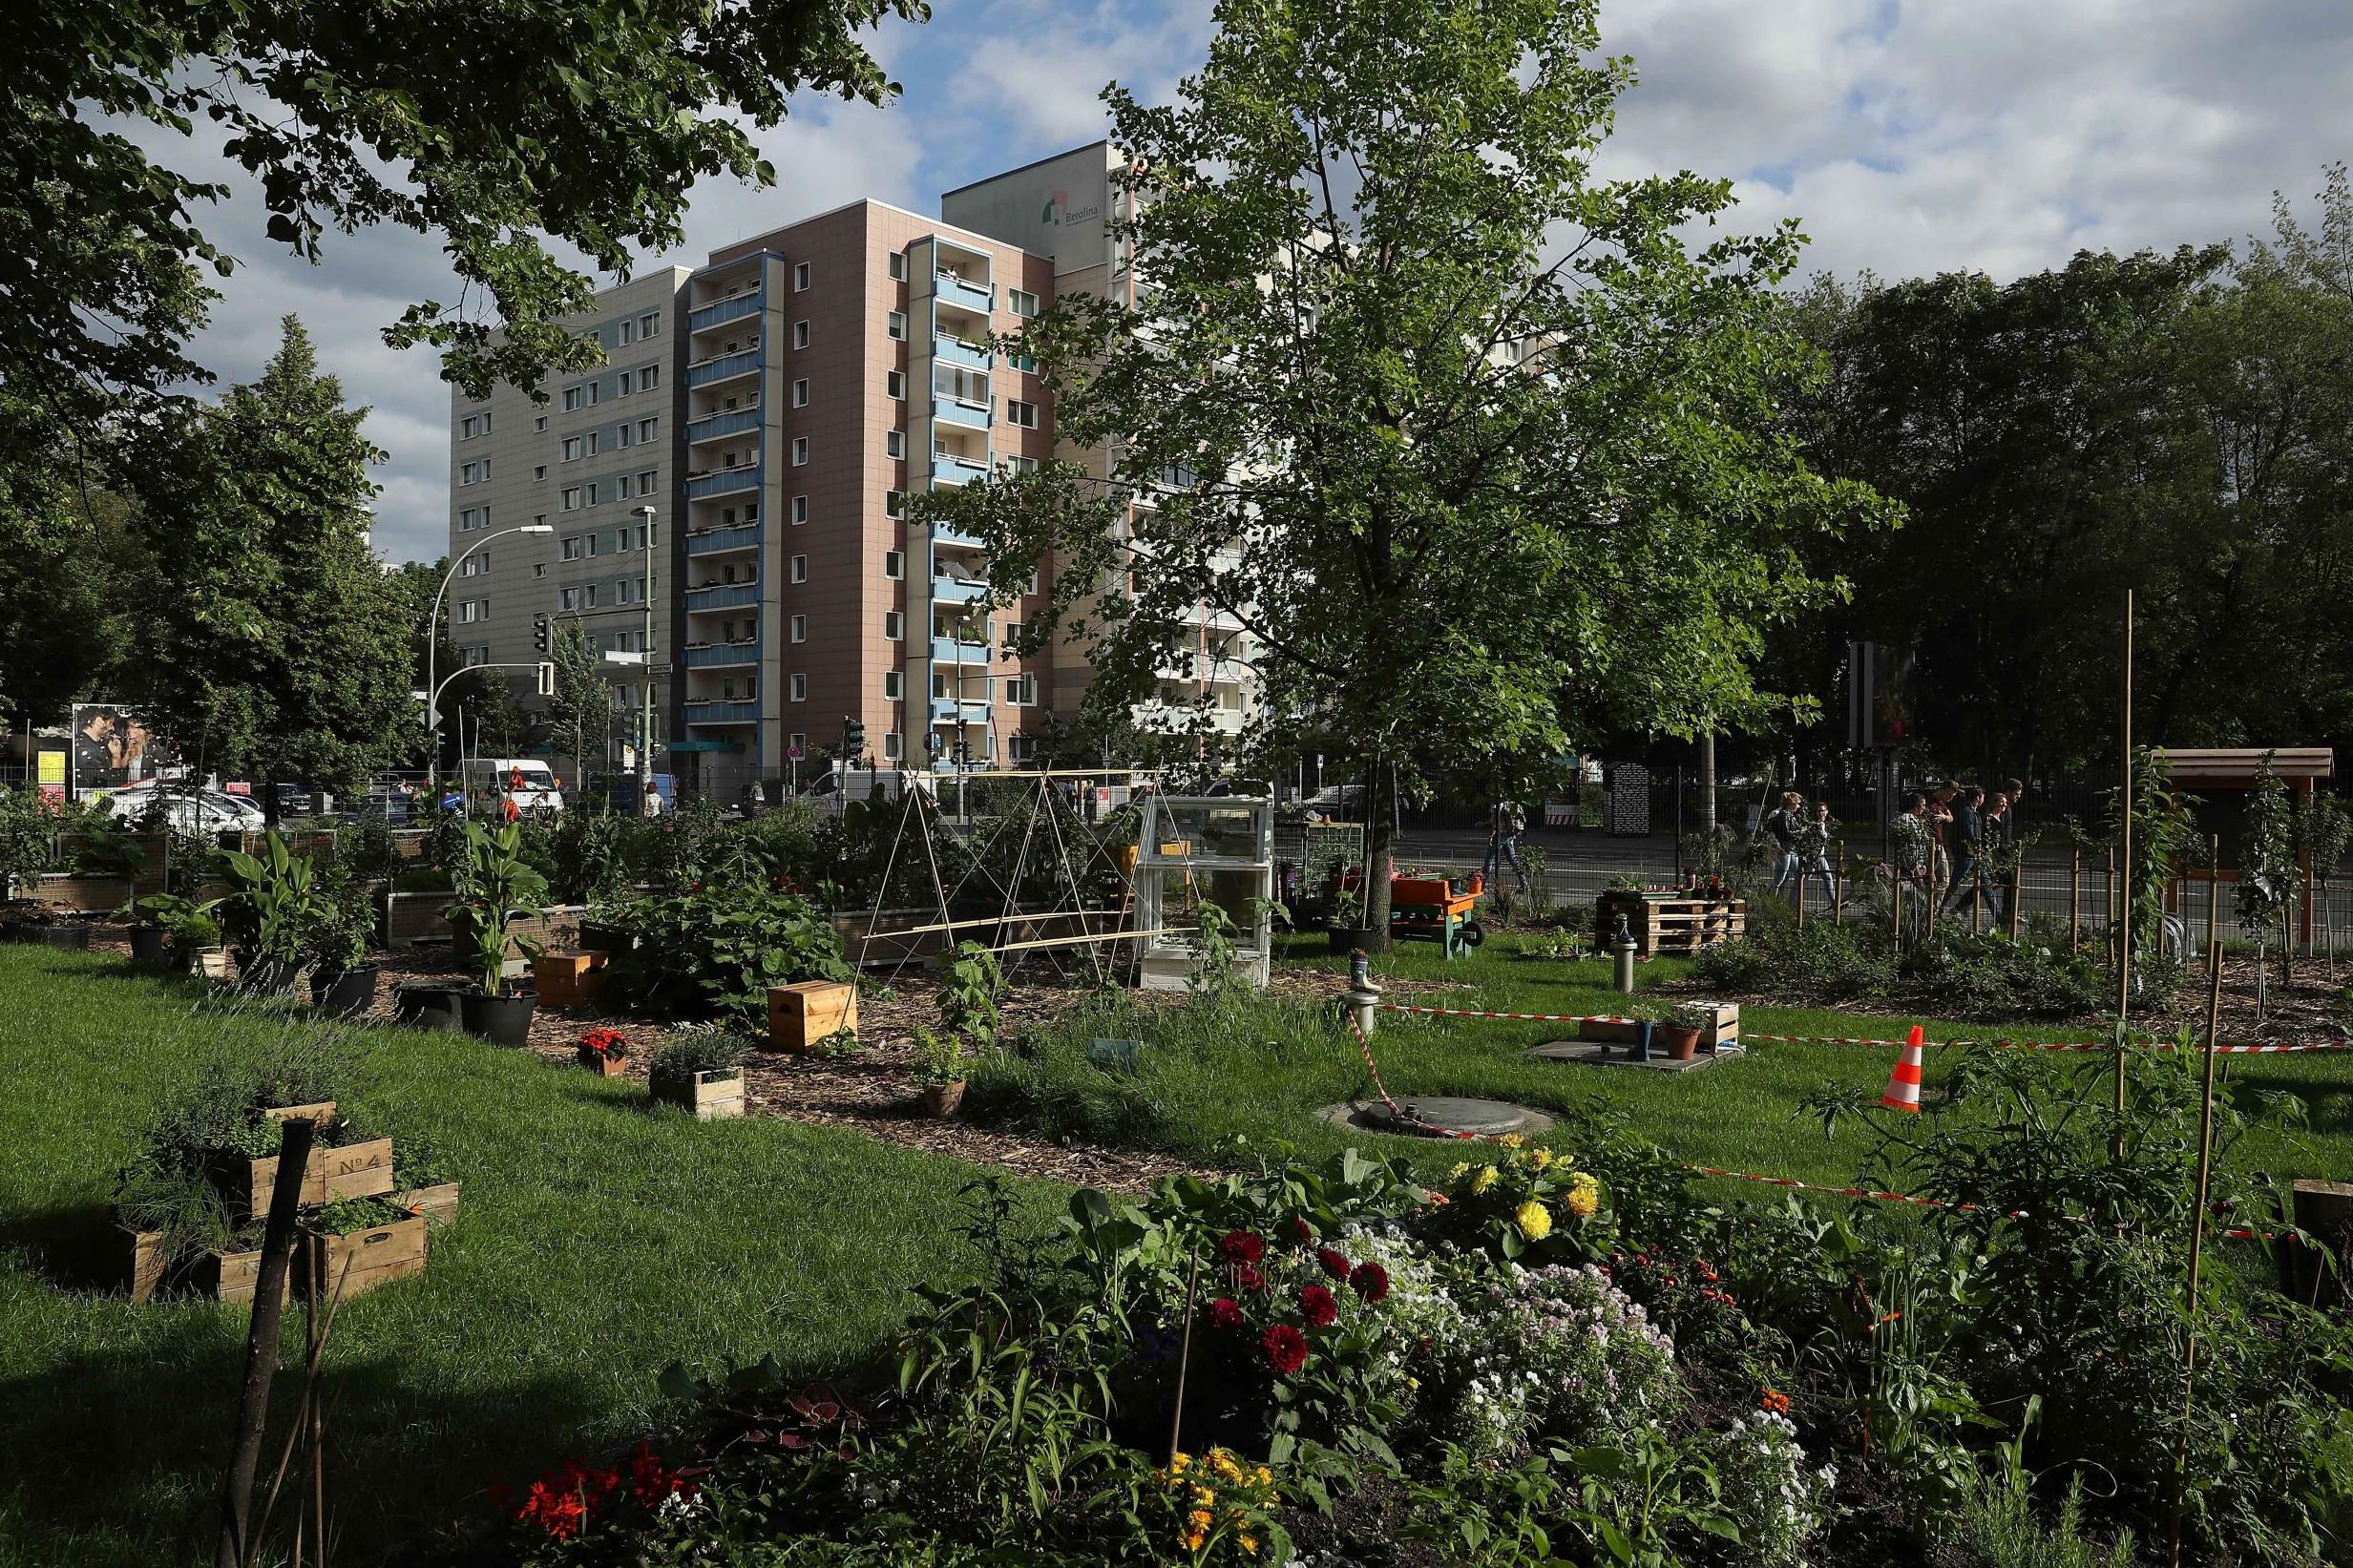 Researchers say making streets and neighbourhoods greener could reduce heart disease over time